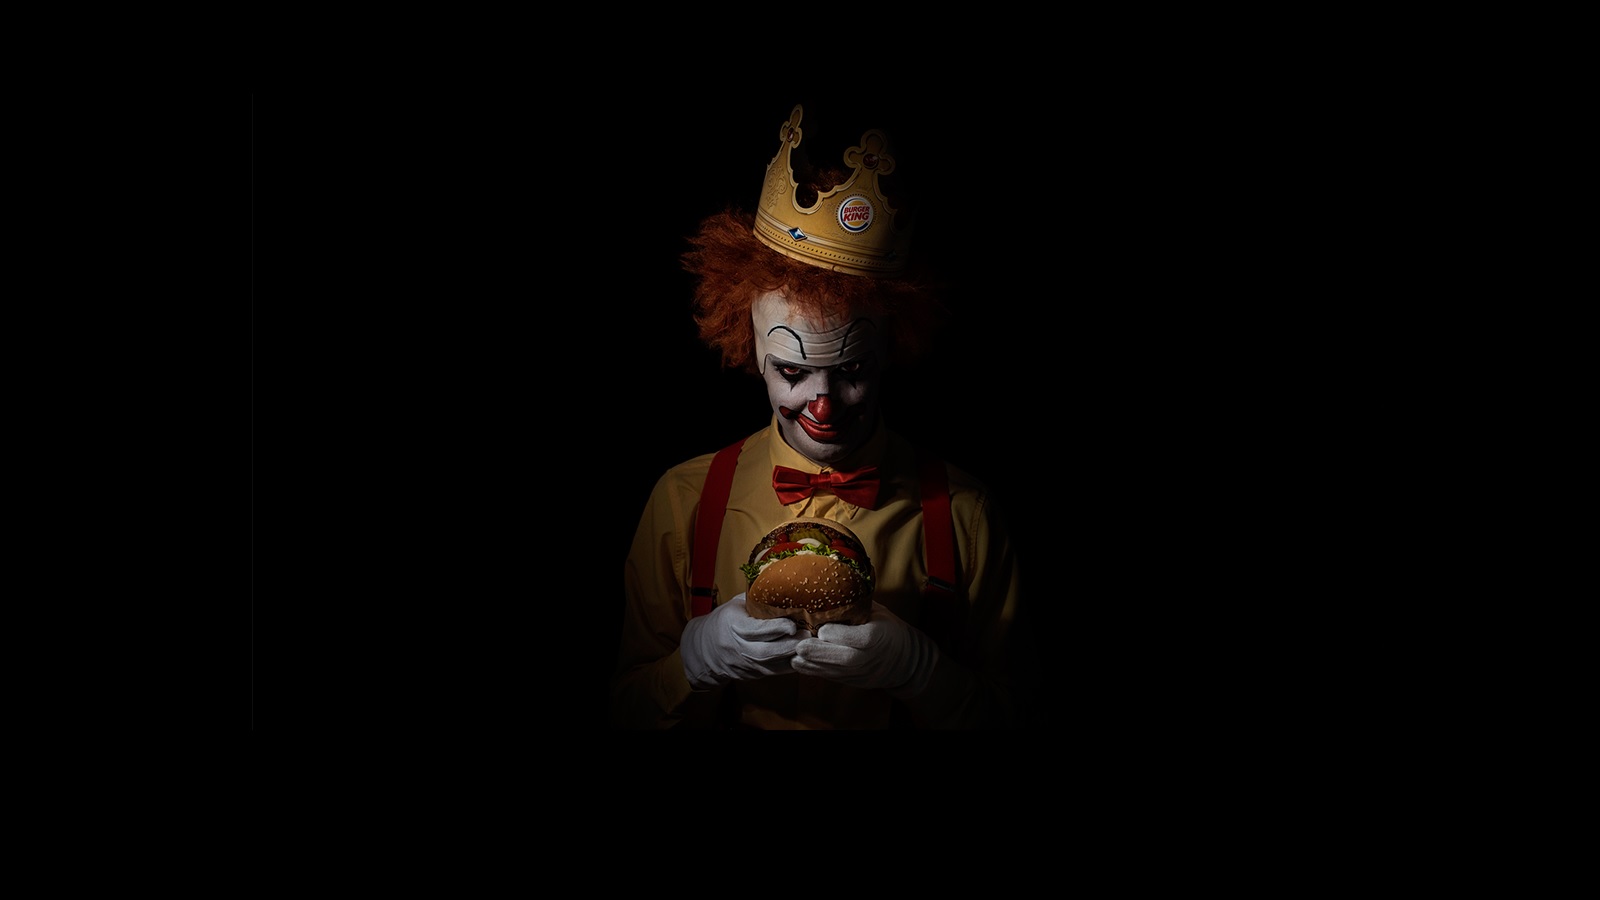 #TBT: Burger King Trolls McDonald’s with Army of Scary Clowns